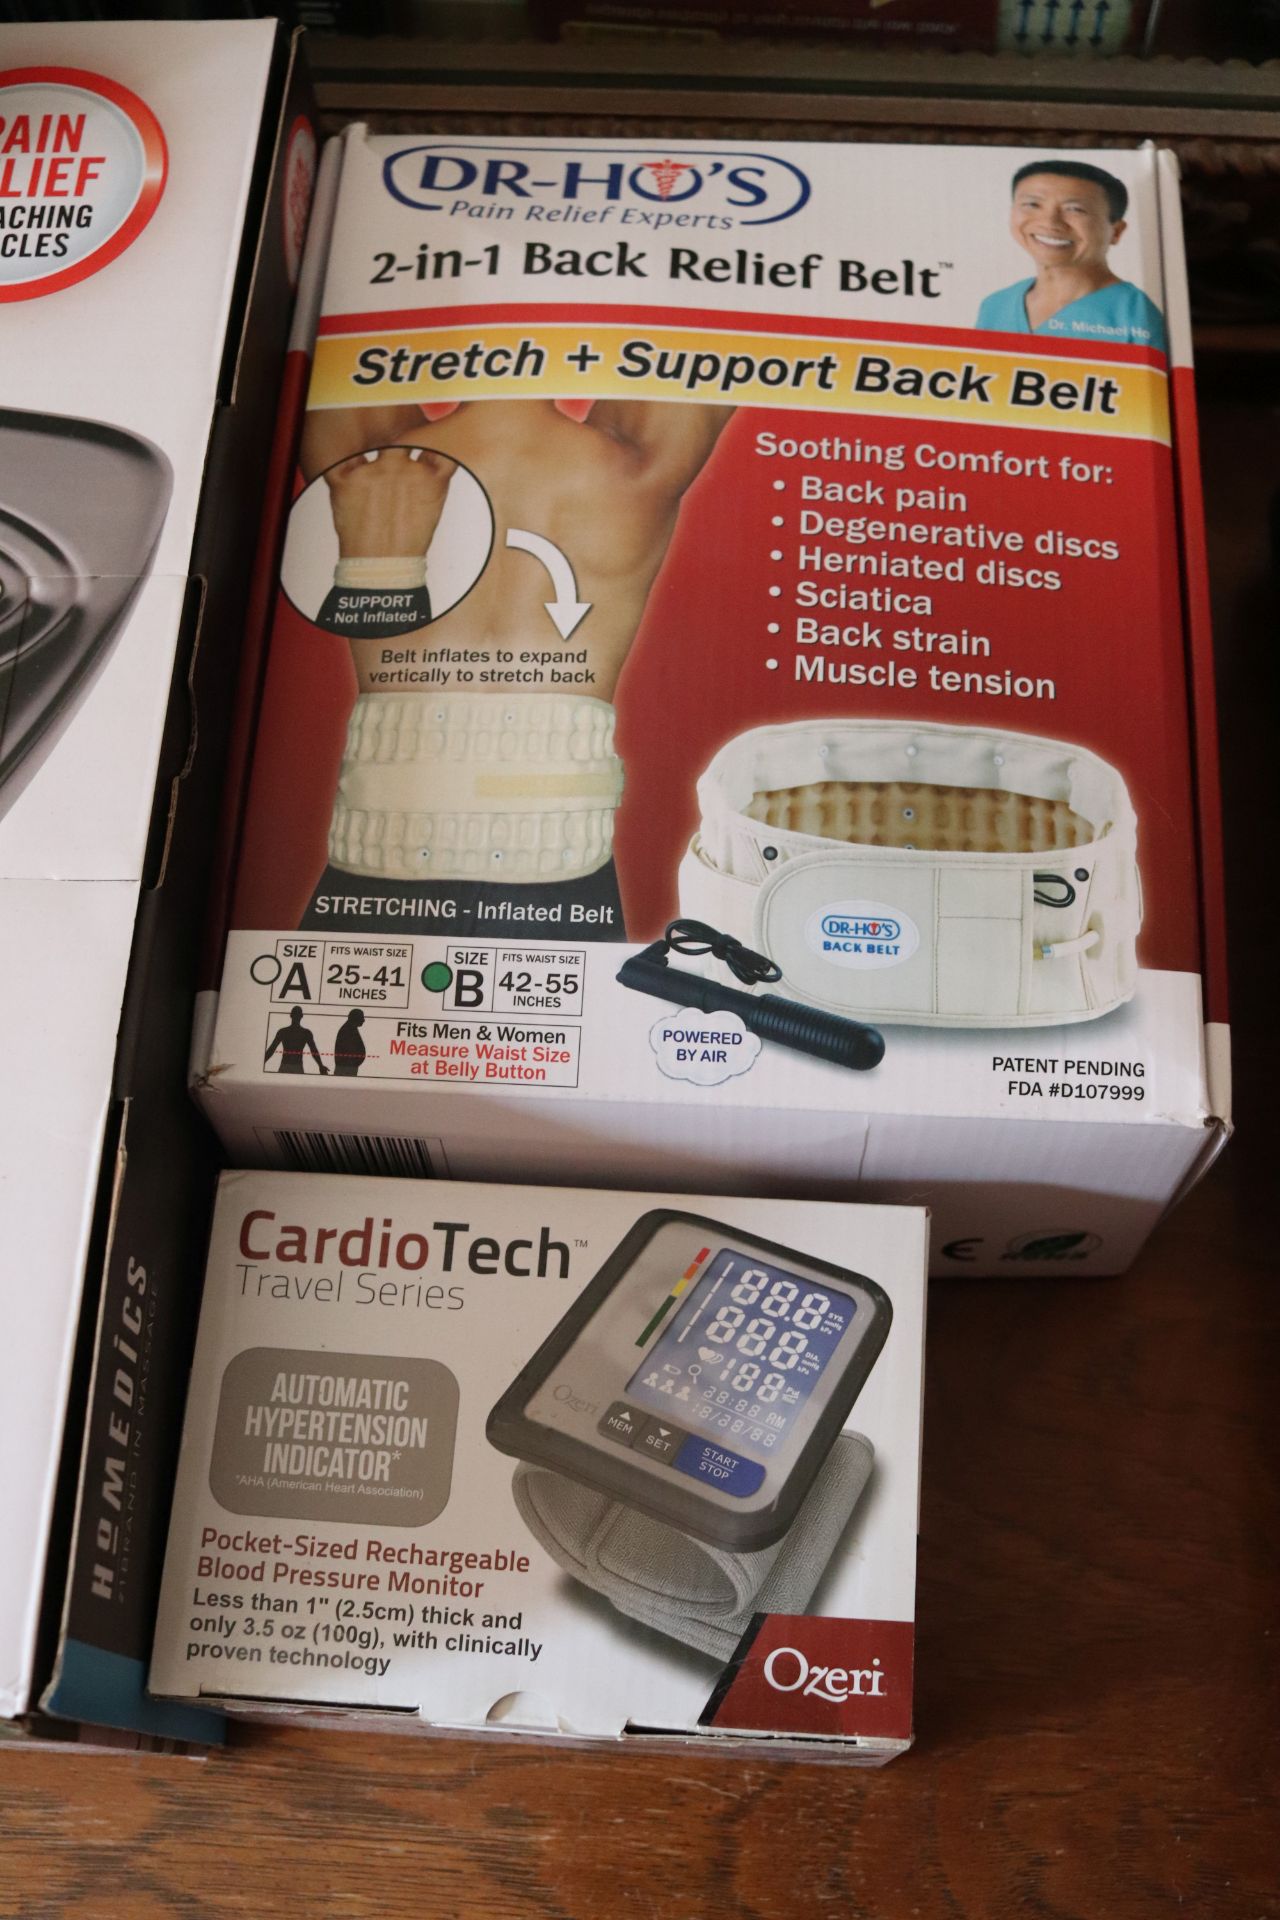 Vibration foot massager, Cup Touch Massager, Dr. Ho's Back Support Belt Cardio Tech Automatic Hypert - Image 3 of 3